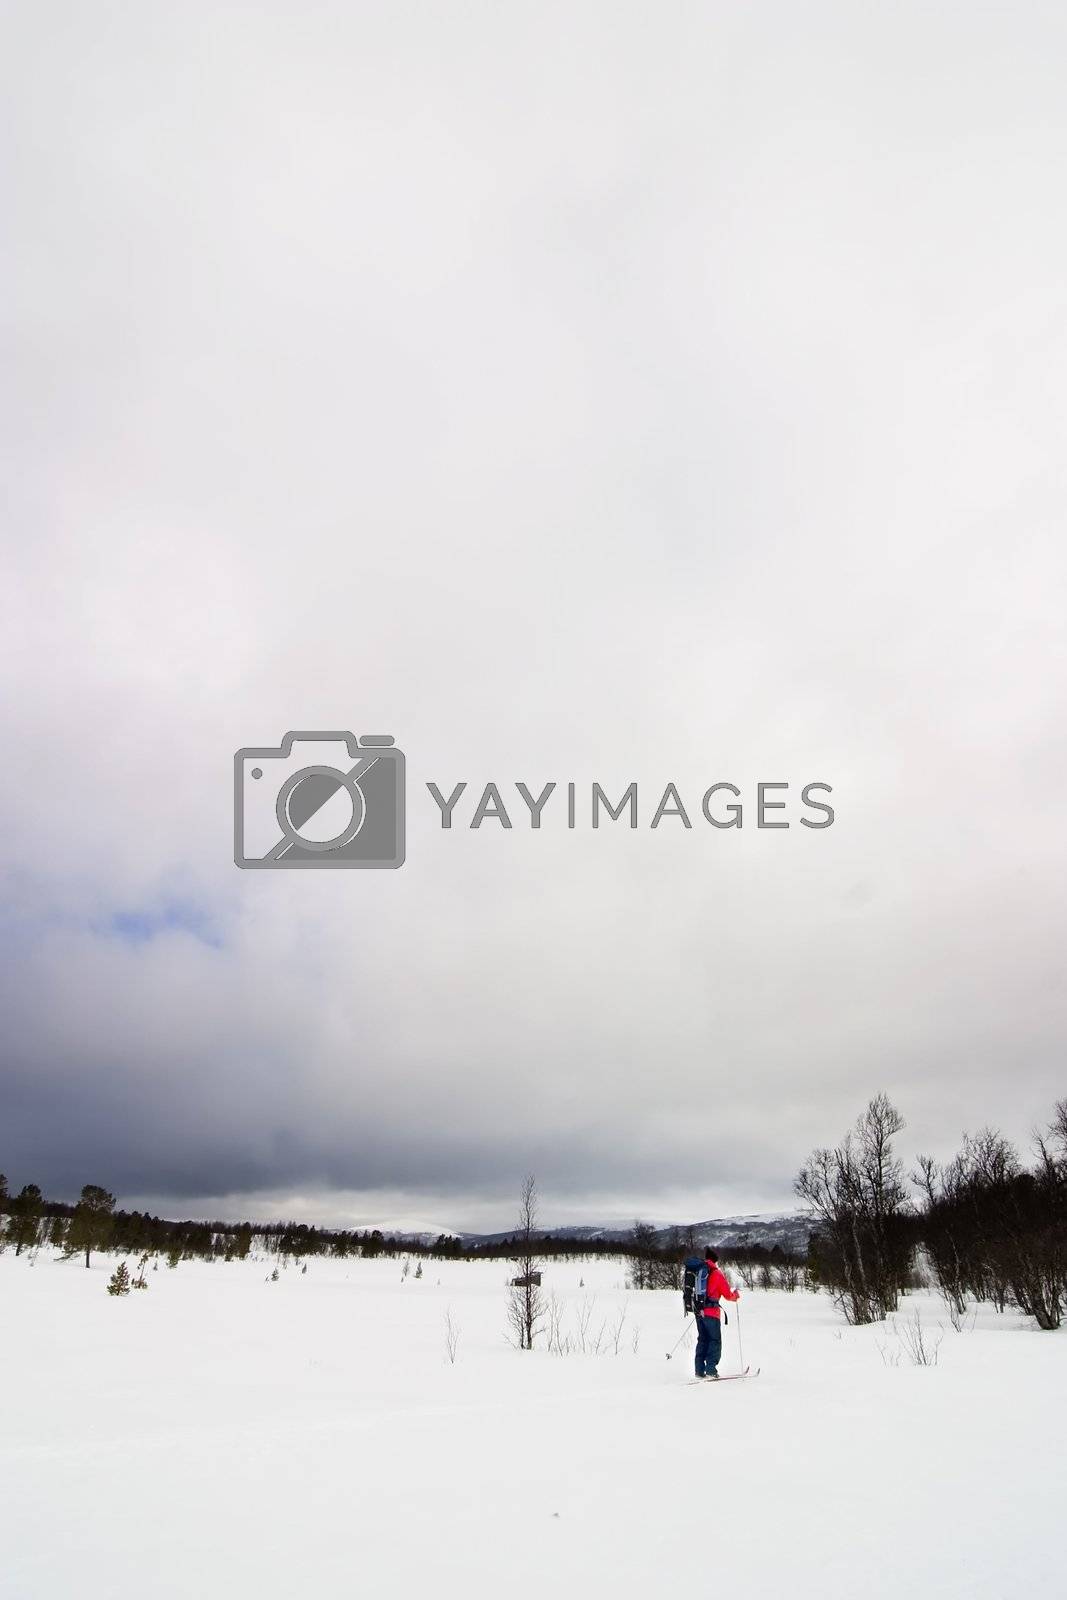 Royalty free image of Skiing in Winter by leaf